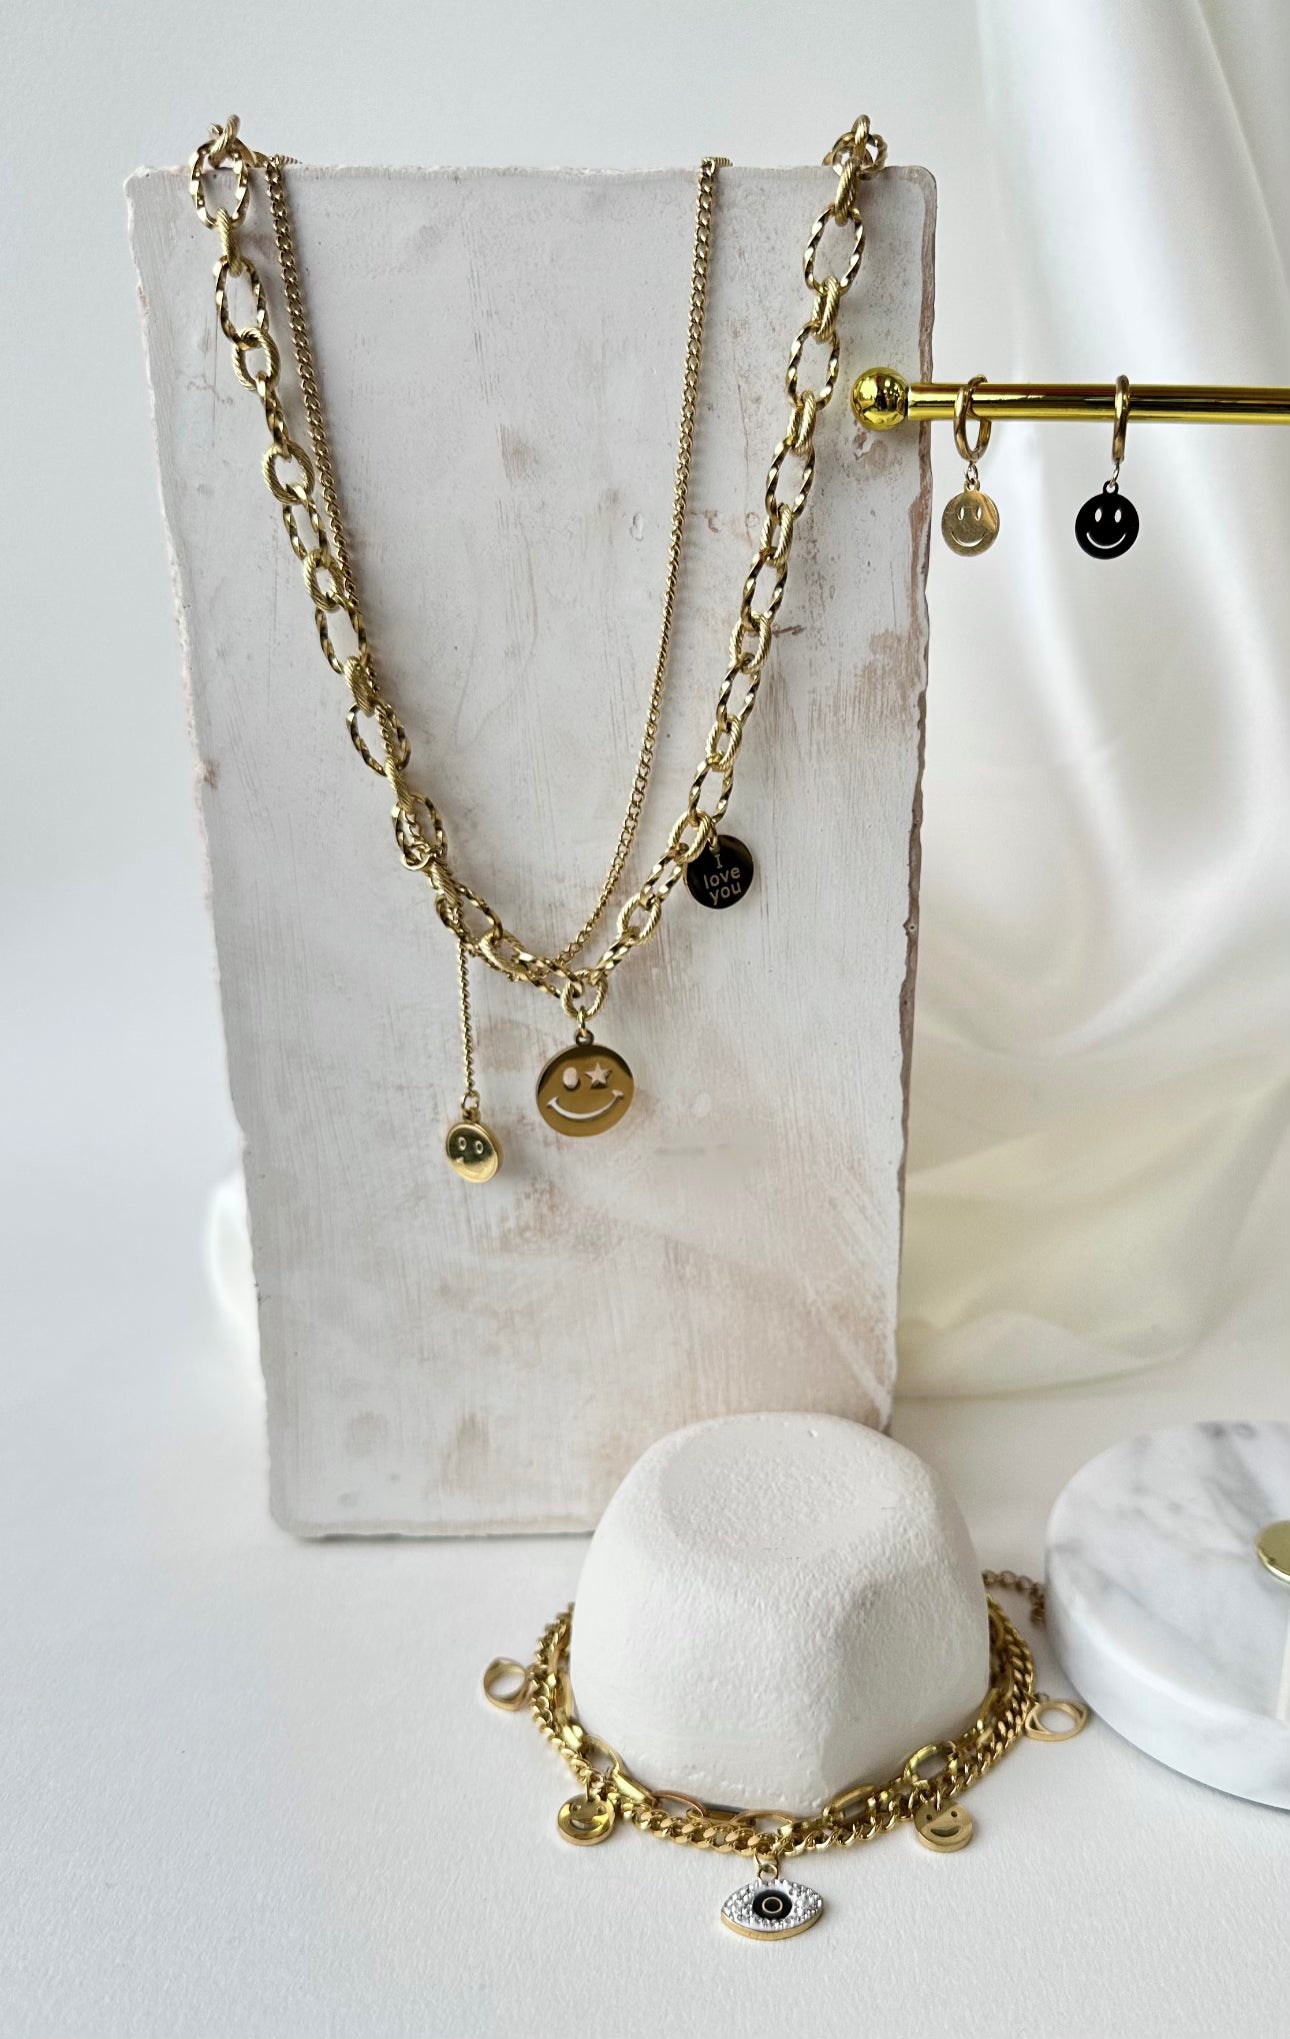 Three Round Accessories Pendant+With Chain Double Chain Necklace